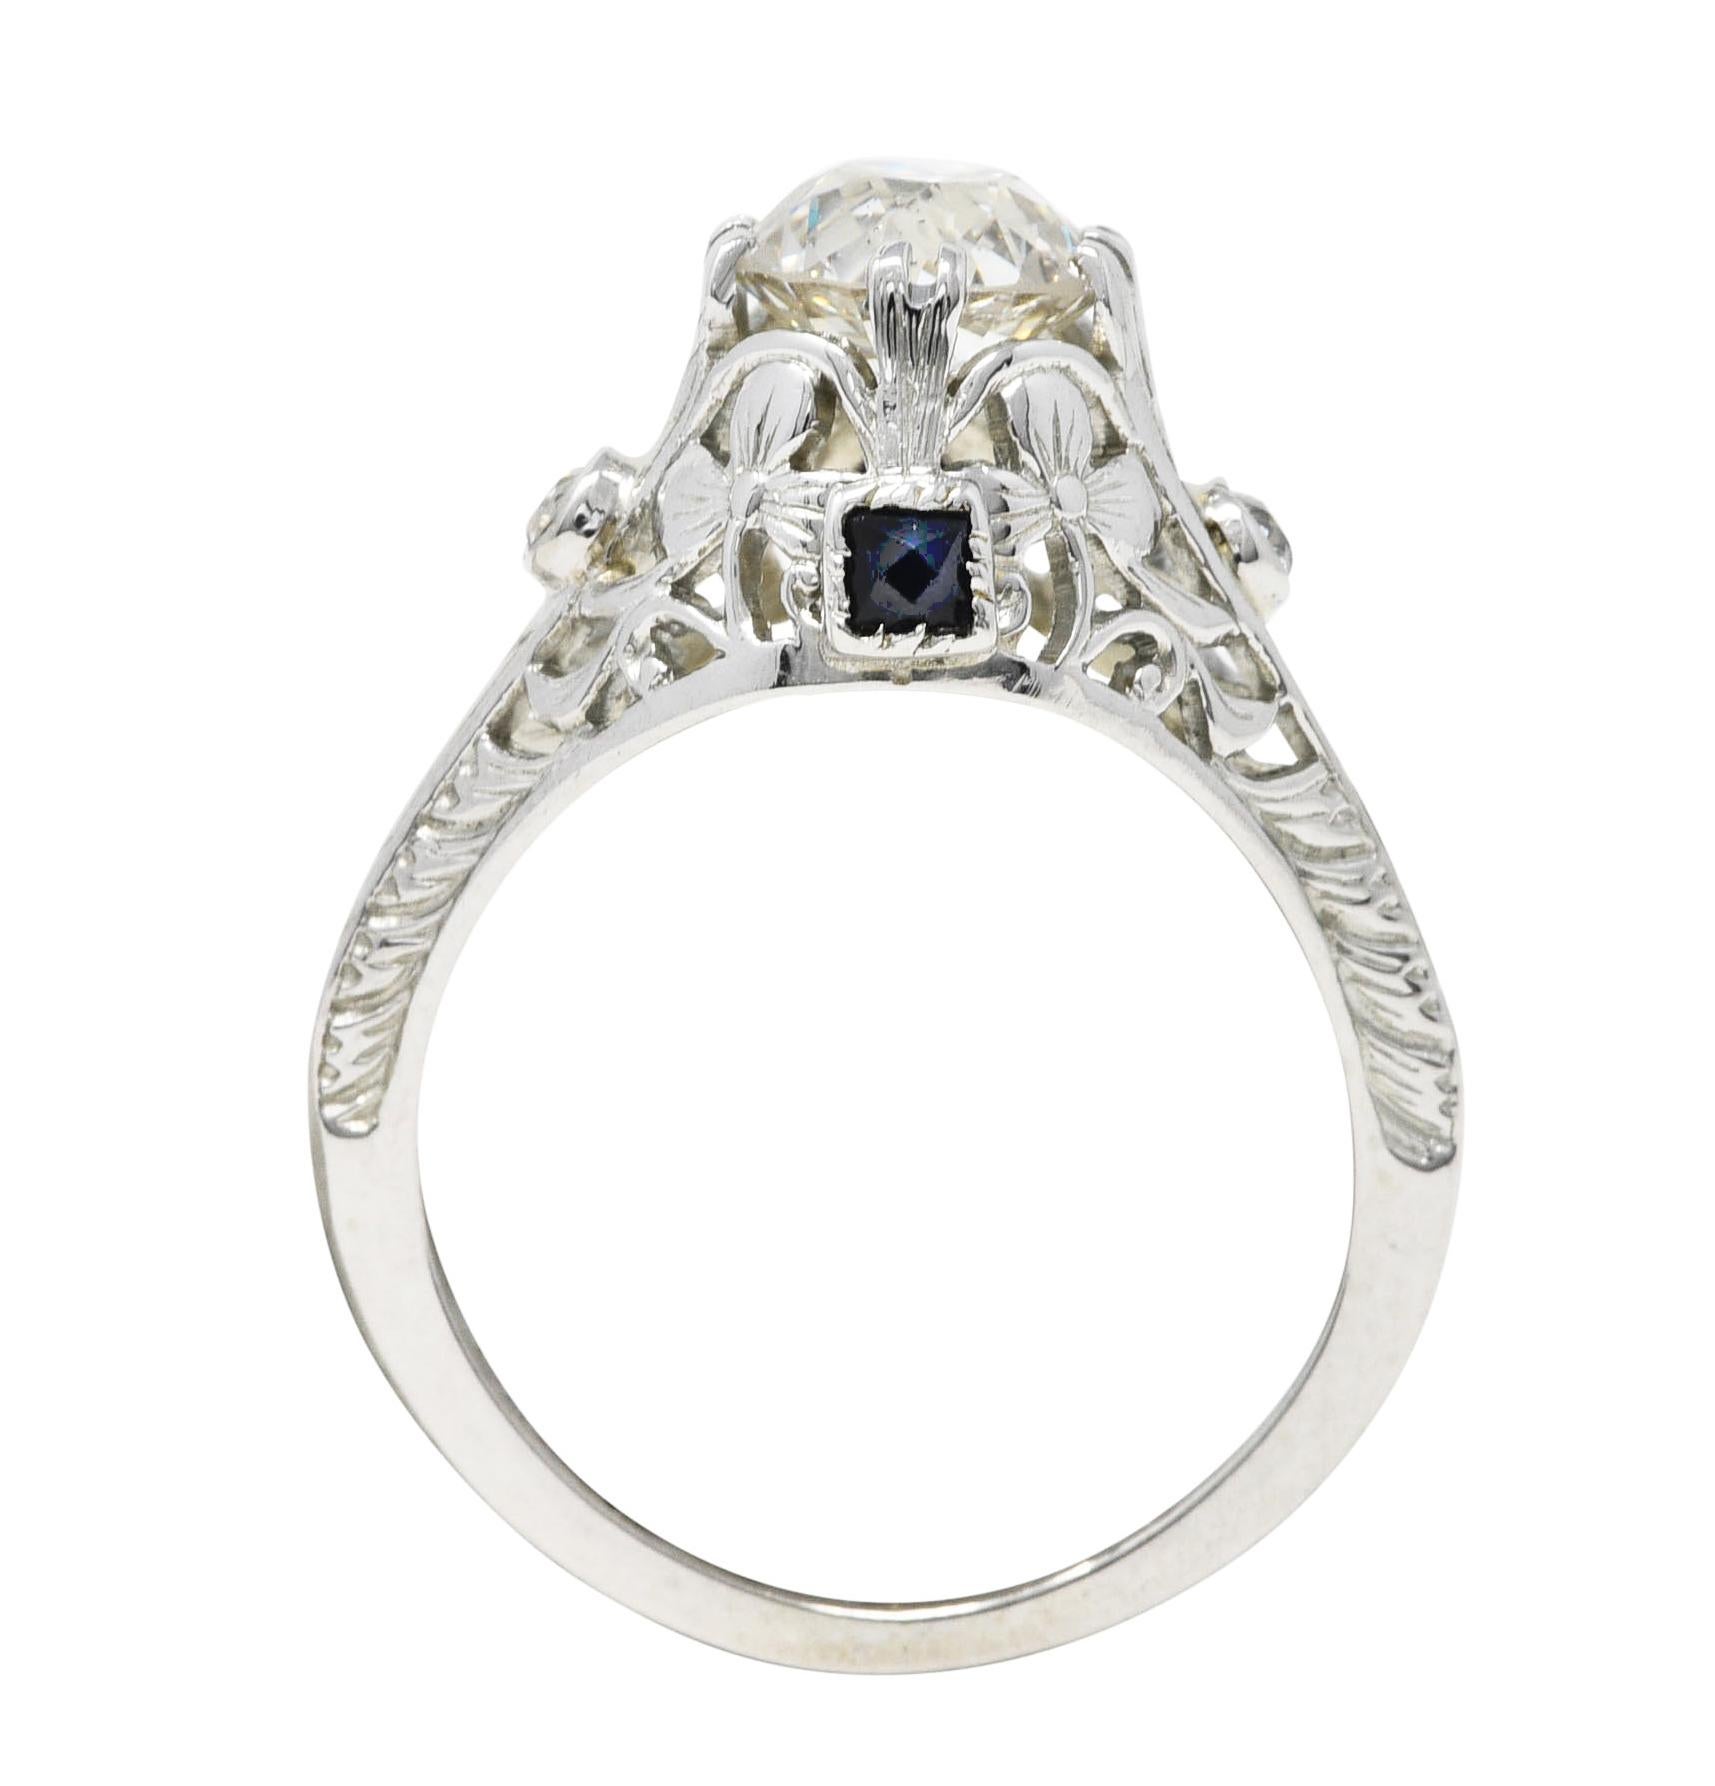 Featuring an old European cut diamond weighing approximately 1.20 carat - K color with SI2 clarity. Set by stylized split prongs in a pierced ornate mounting depicting scrolling florals at gallery. Accented by bezel set old European cut diamonds